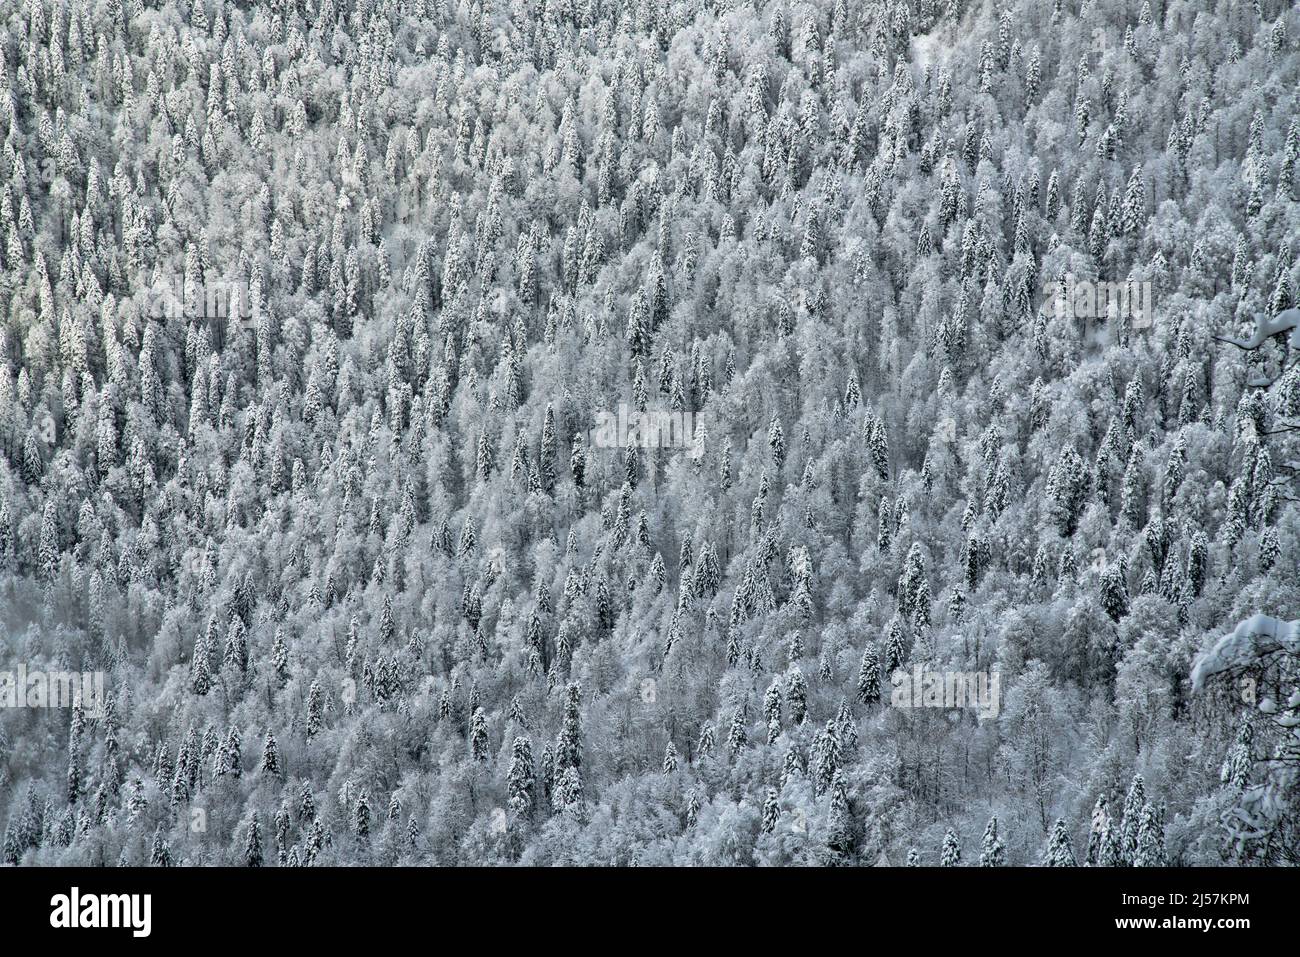 Extensive, thick stand of trees spruce forests in the winter mountains at an altitude of 2000 meters a.s.l. Cloud-forest belt. Oriental spruce (Picea Stock Photo